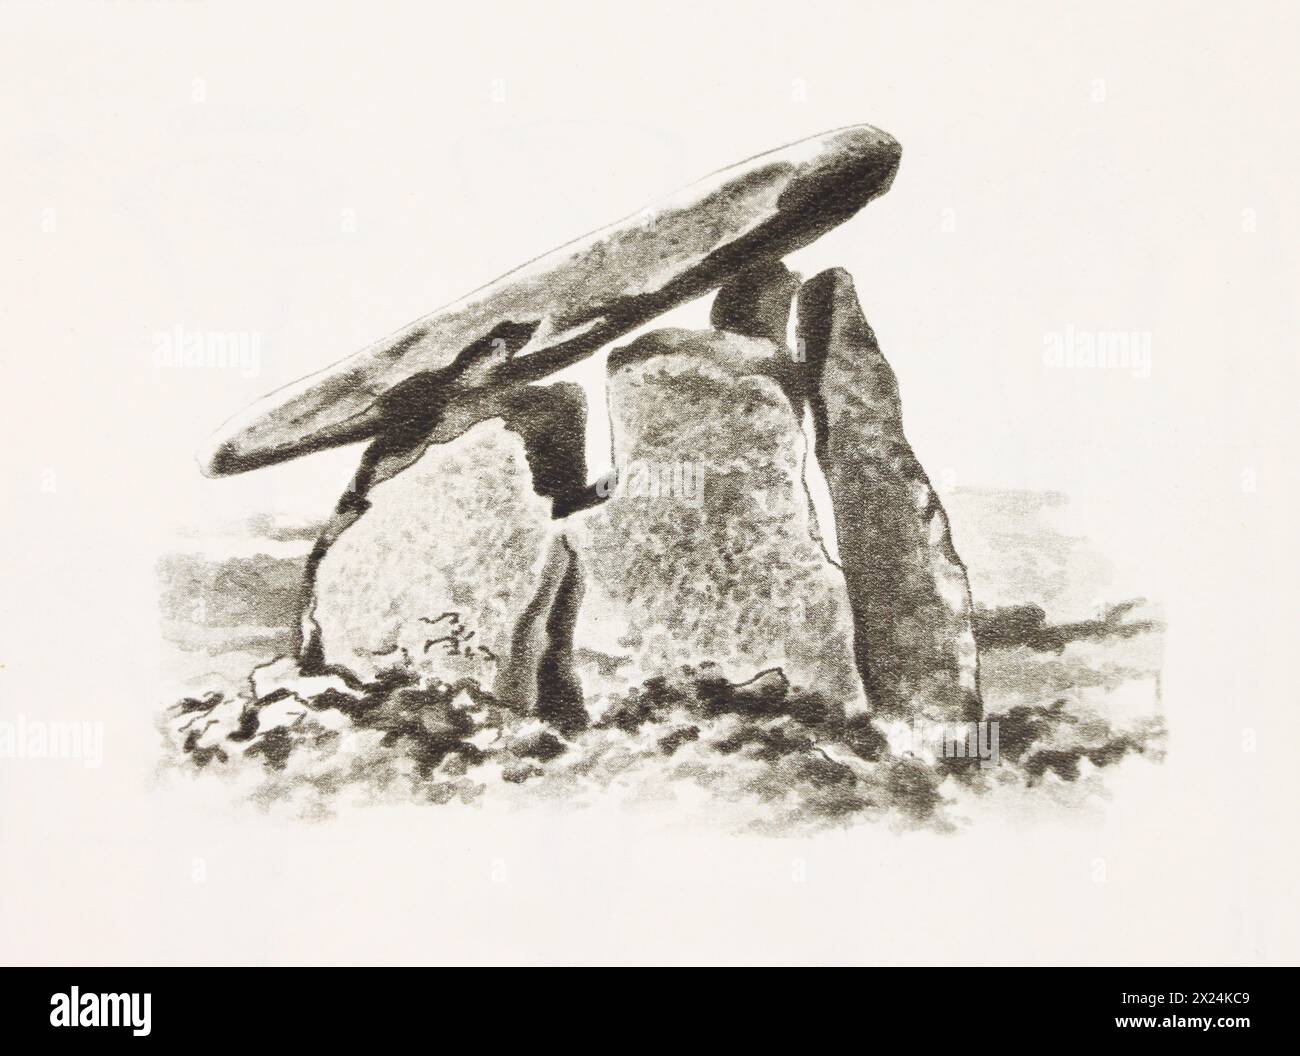 Dolmen in England. Engraving from the mid-20th century Stock Photo